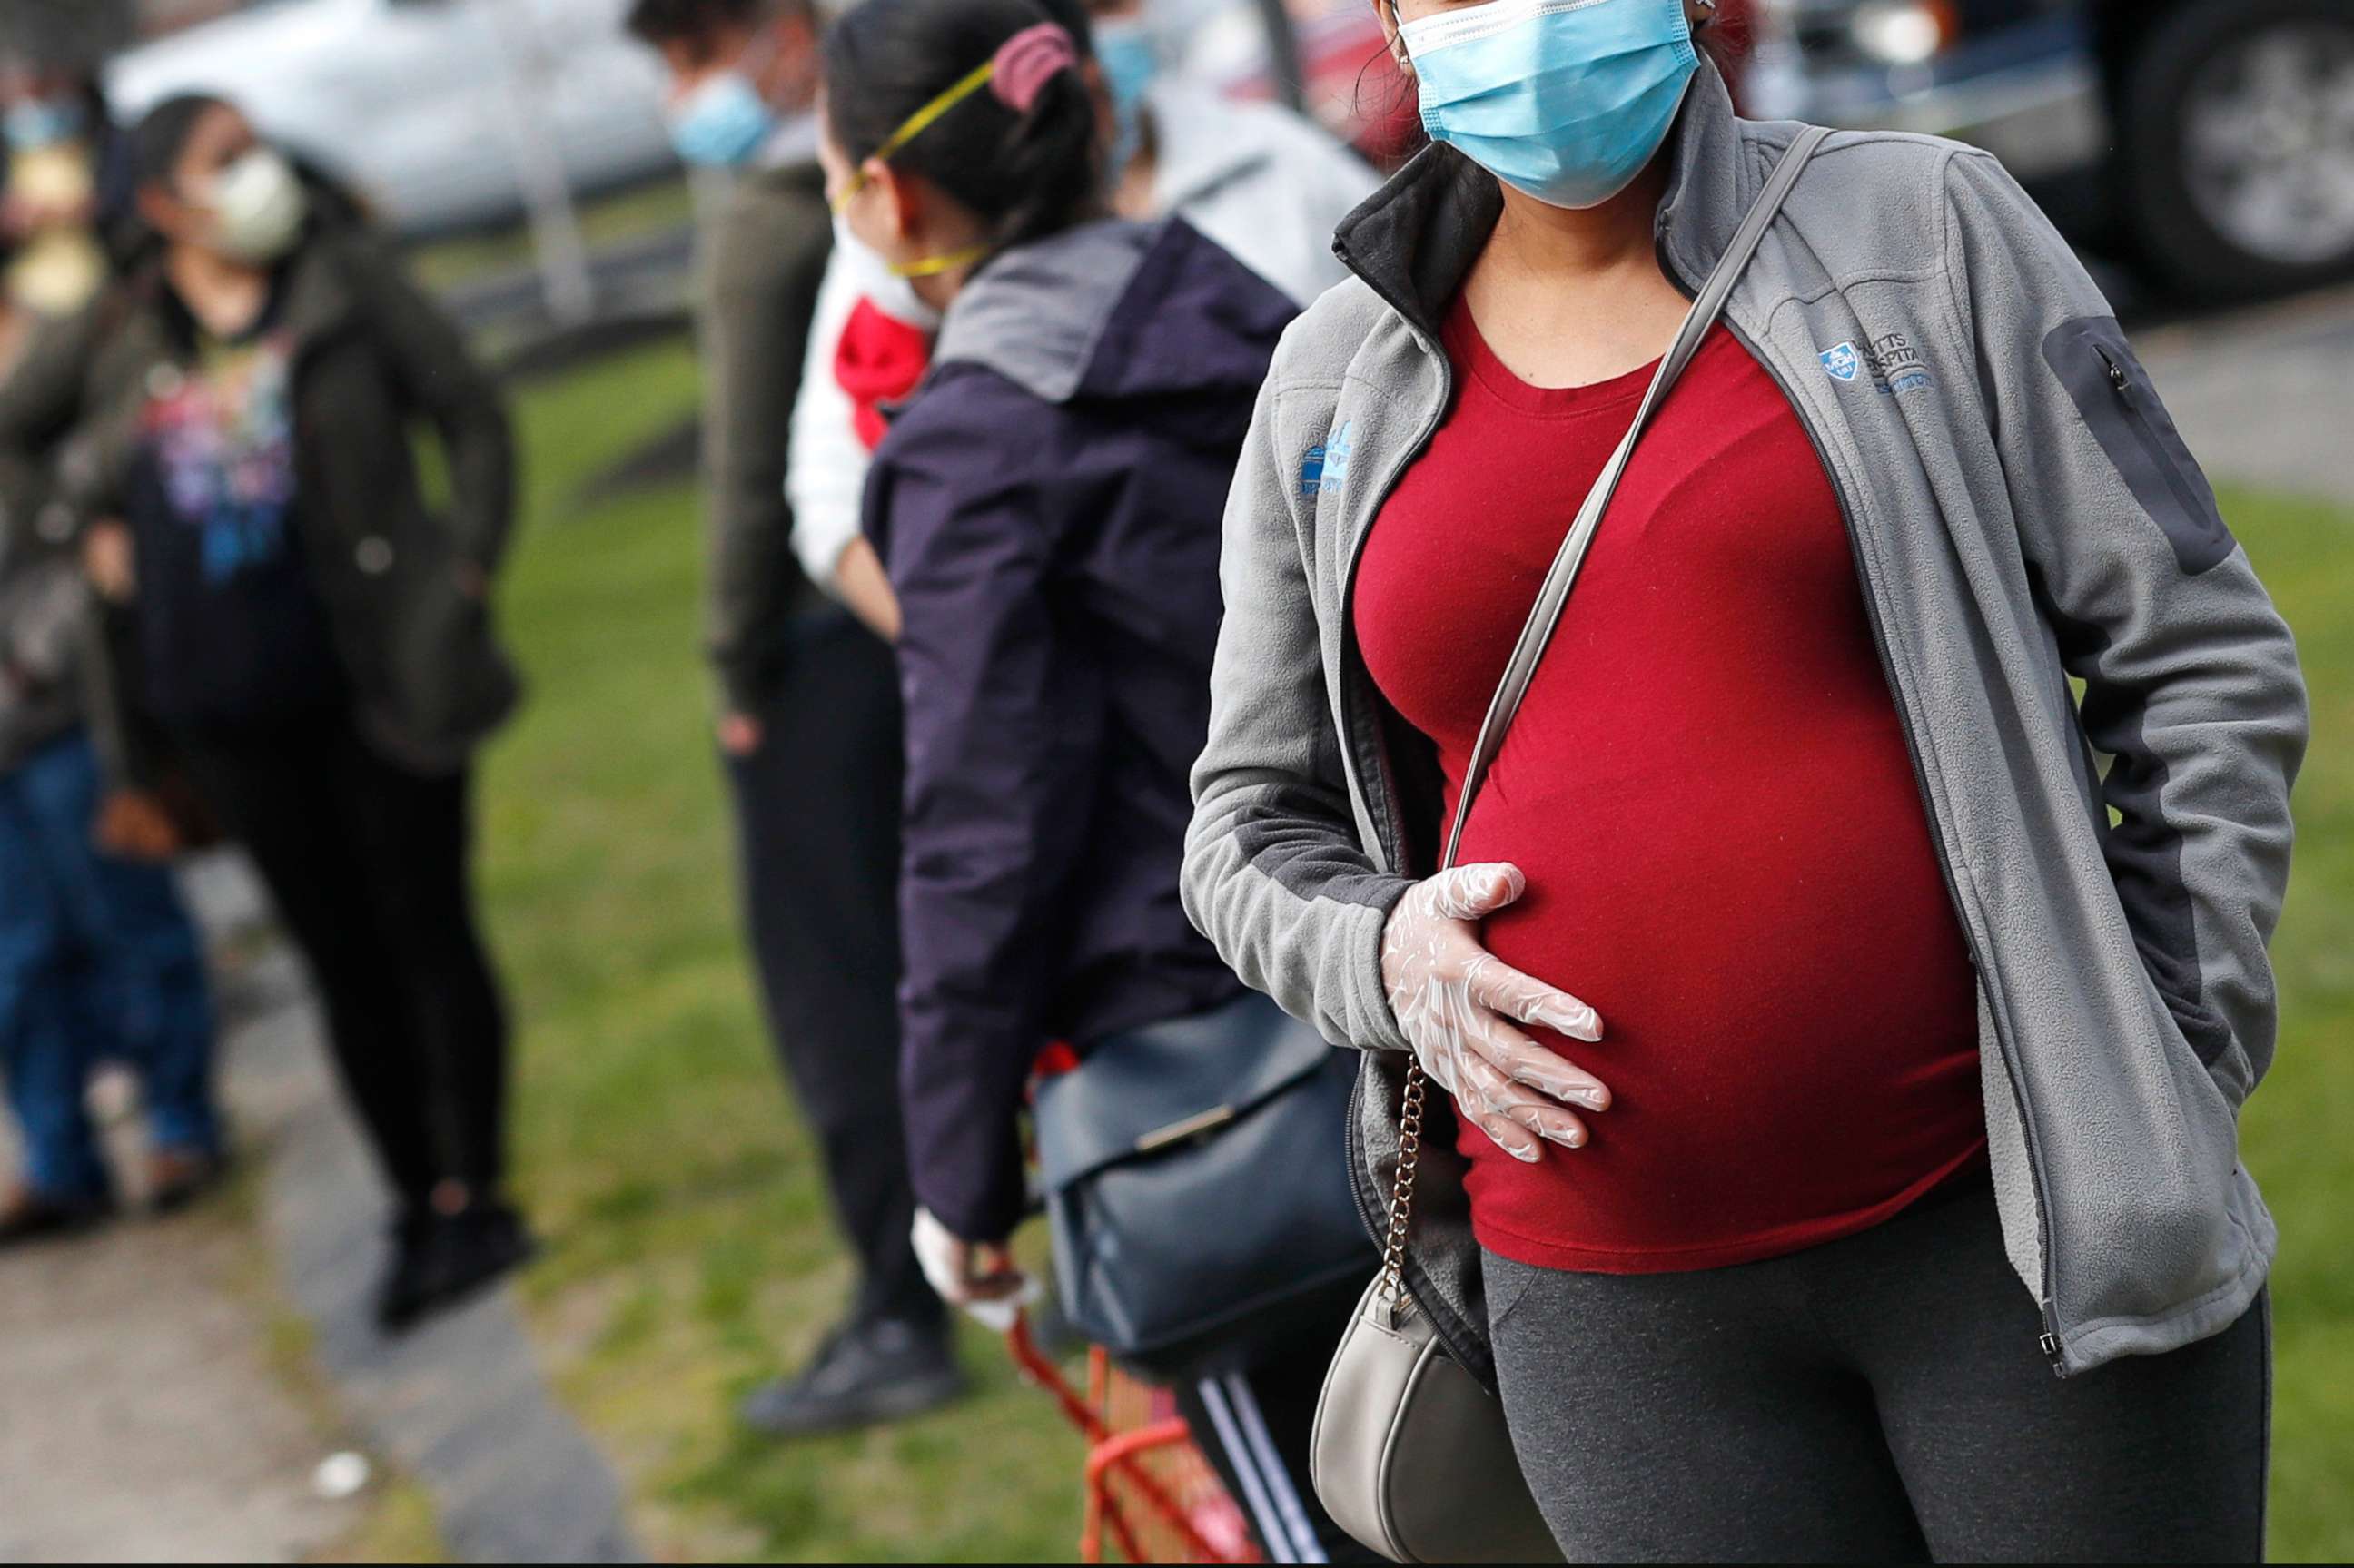 PHOTO: In this Thursday, May 7, 2020 file photo, a pregnant woman wearing a face mask and gloves holds her belly as she waits in line for groceries with hundreds during a food pantry at St. Mary's Church in Waltham, Mass.